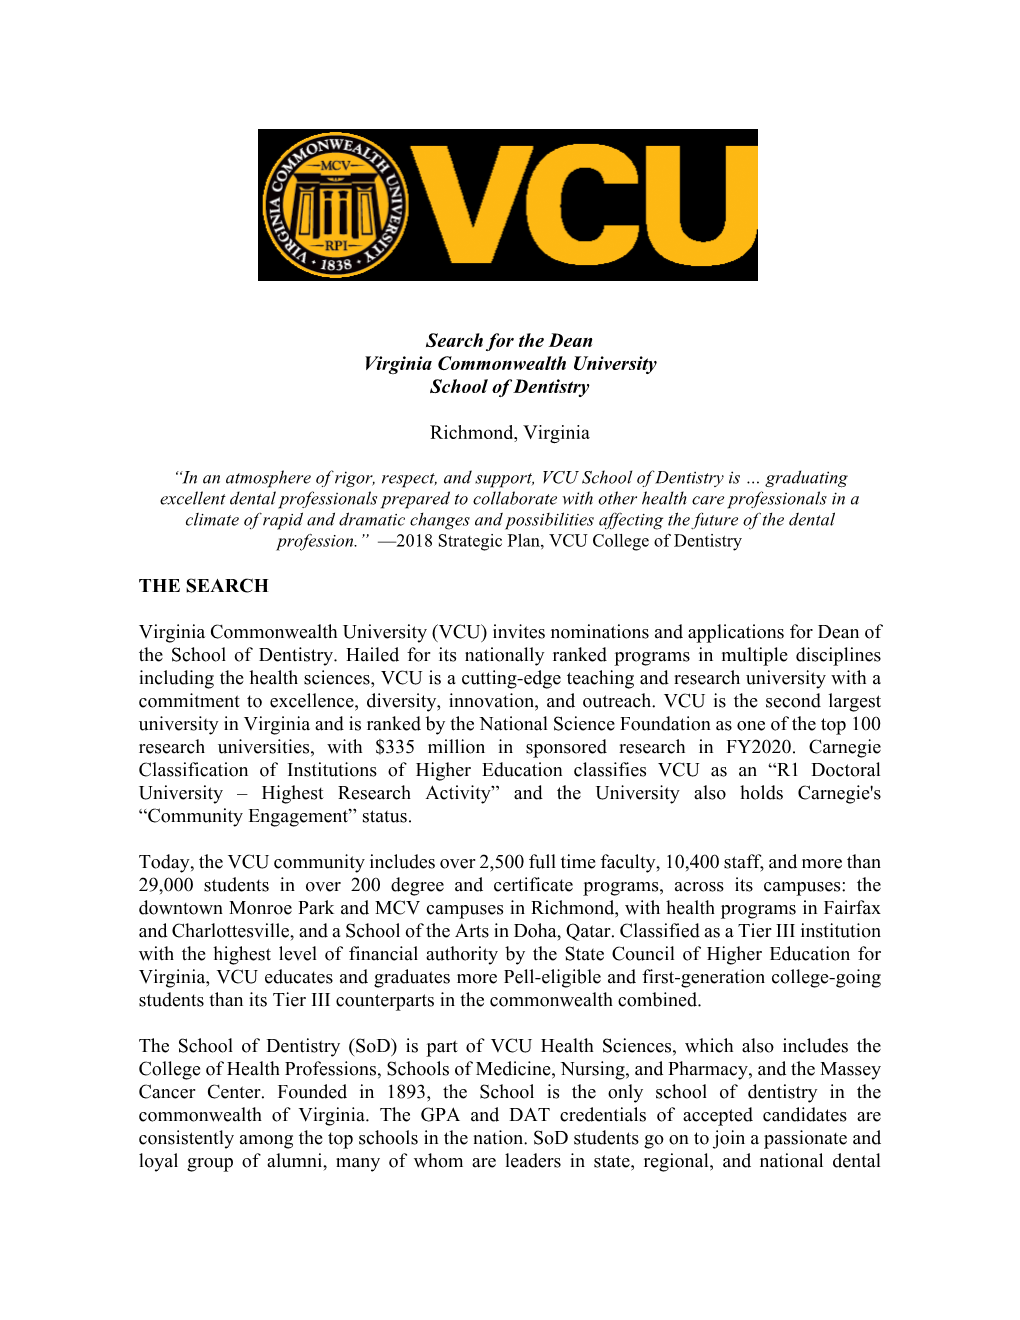 Search for the Dean Virginia Commonwealth University School of Dentistry